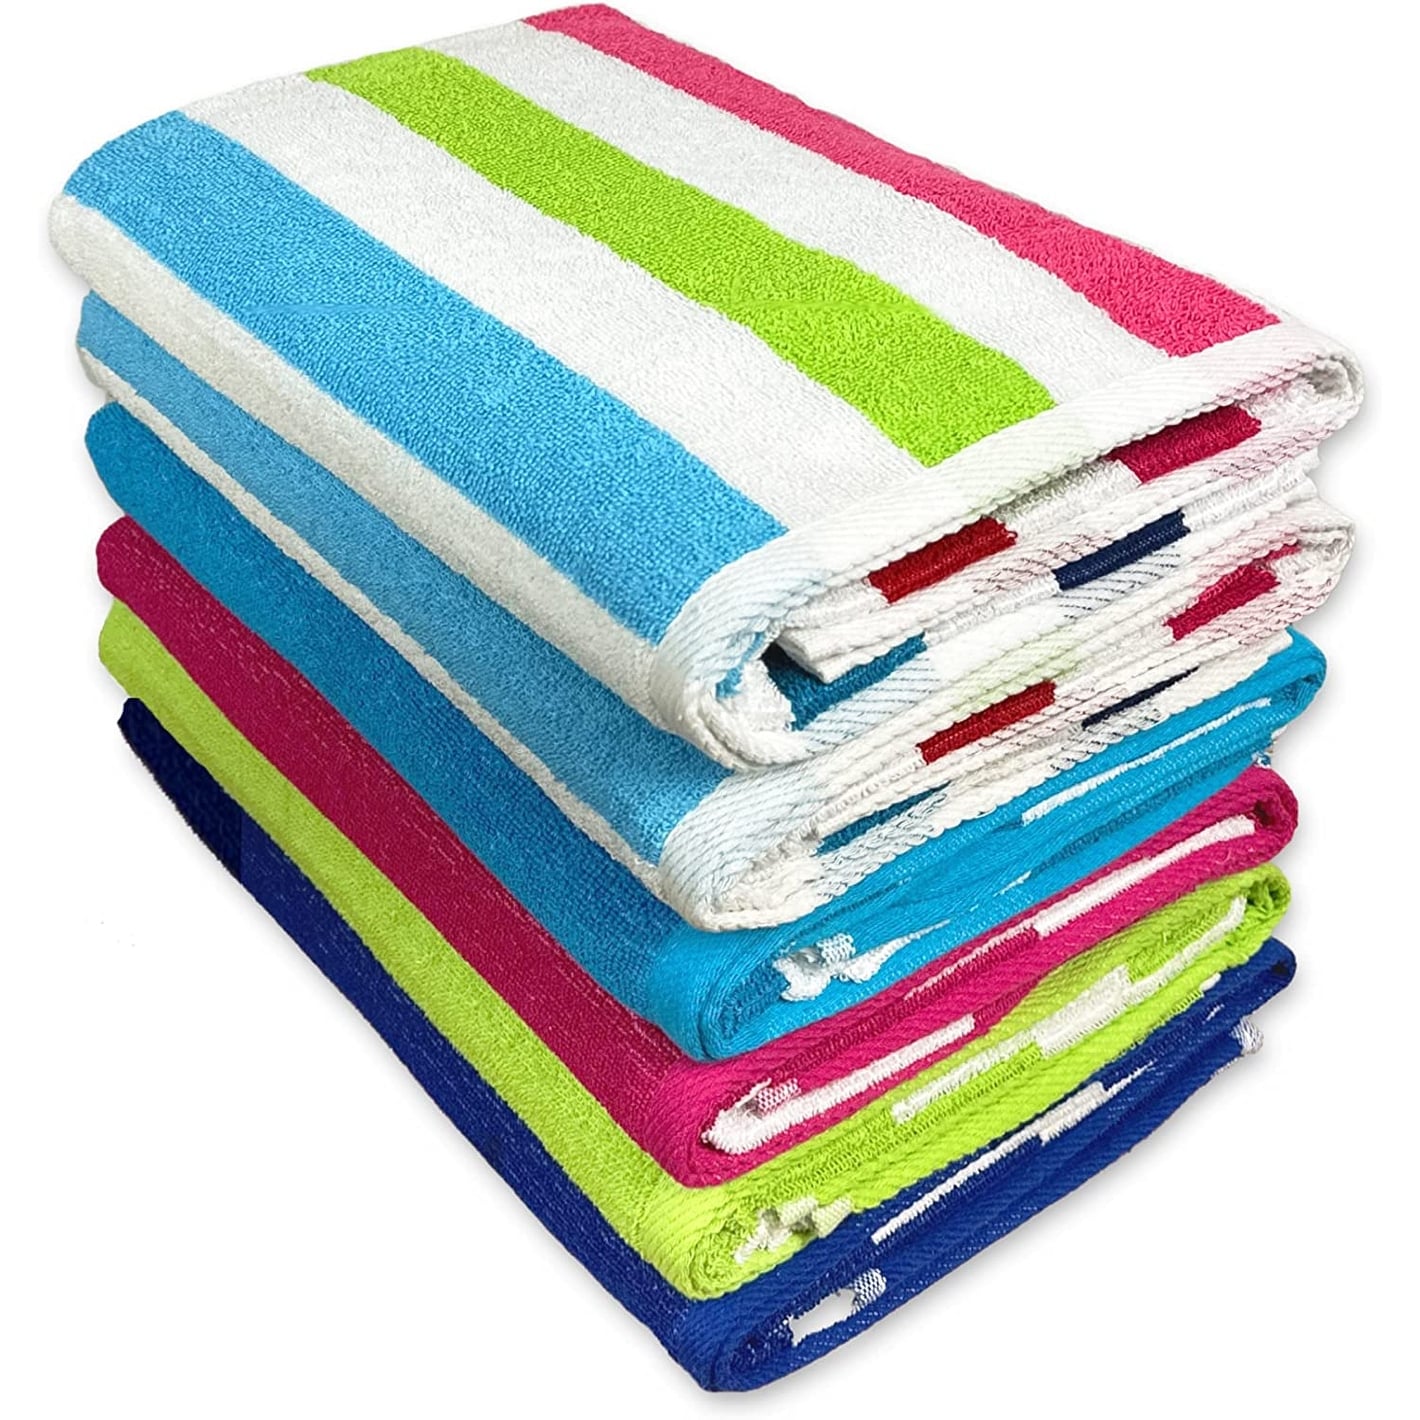 https://ak1.ostkcdn.com/images/products/is/images/direct/99d25ce0463546a643521af07d868ba8df5f4f26/Kaufman---Cabana-Stripe-Beach-%26-Pool-Towel-30in-X-60in---Soft-%26-Absorbent---Assorted-Colors---100%25-Cotton.jpg